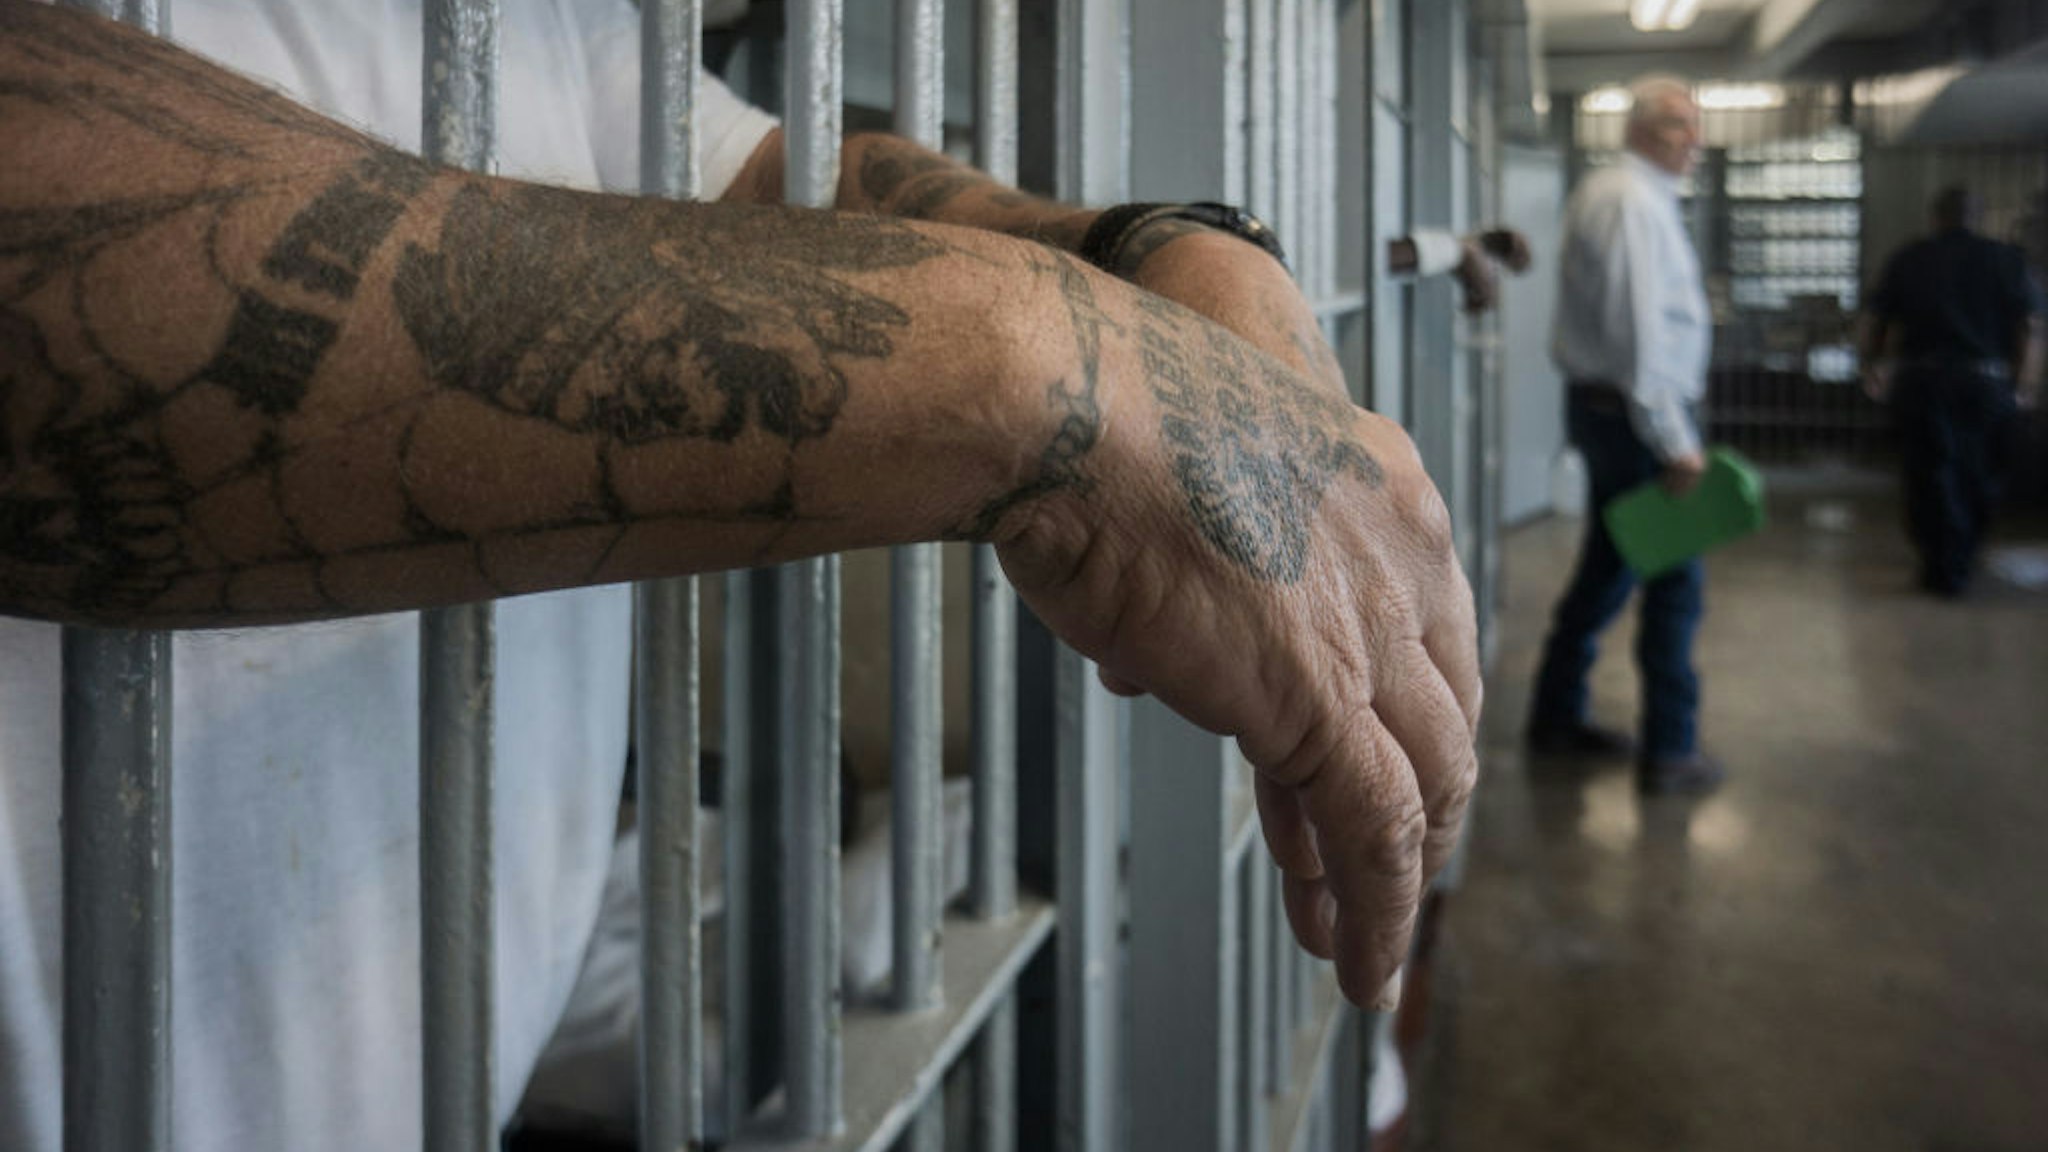 ANGOLA PRISON, LOUISIANA - OCTOBER 14, 2013: A prisoner's hands inside a punishment cell wing at Angola prison. The Louisiana State Penitentiary, also known as Angola, and nicknamed the "Alcatraz of the South" and "The Farm" is a maximum-security prison farm in Louisiana operated by the Louisiana Department of Public Safety &amp; Corrections. It is named Angola after the former plantation that occupied this territory, which was named for the African country that was the origin of many enslaved Africans brought to Louisiana in slavery times. This is the largest maximum-security prison in the United States[with 6,300 prisoners and 1,800 staff, including corrections officers, janitors, maintenance, and wardens. It is located on an 18,000-acre (7,300 ha) property that was previously known as the Angola Plantations and bordered on three sides by the Mississippi River